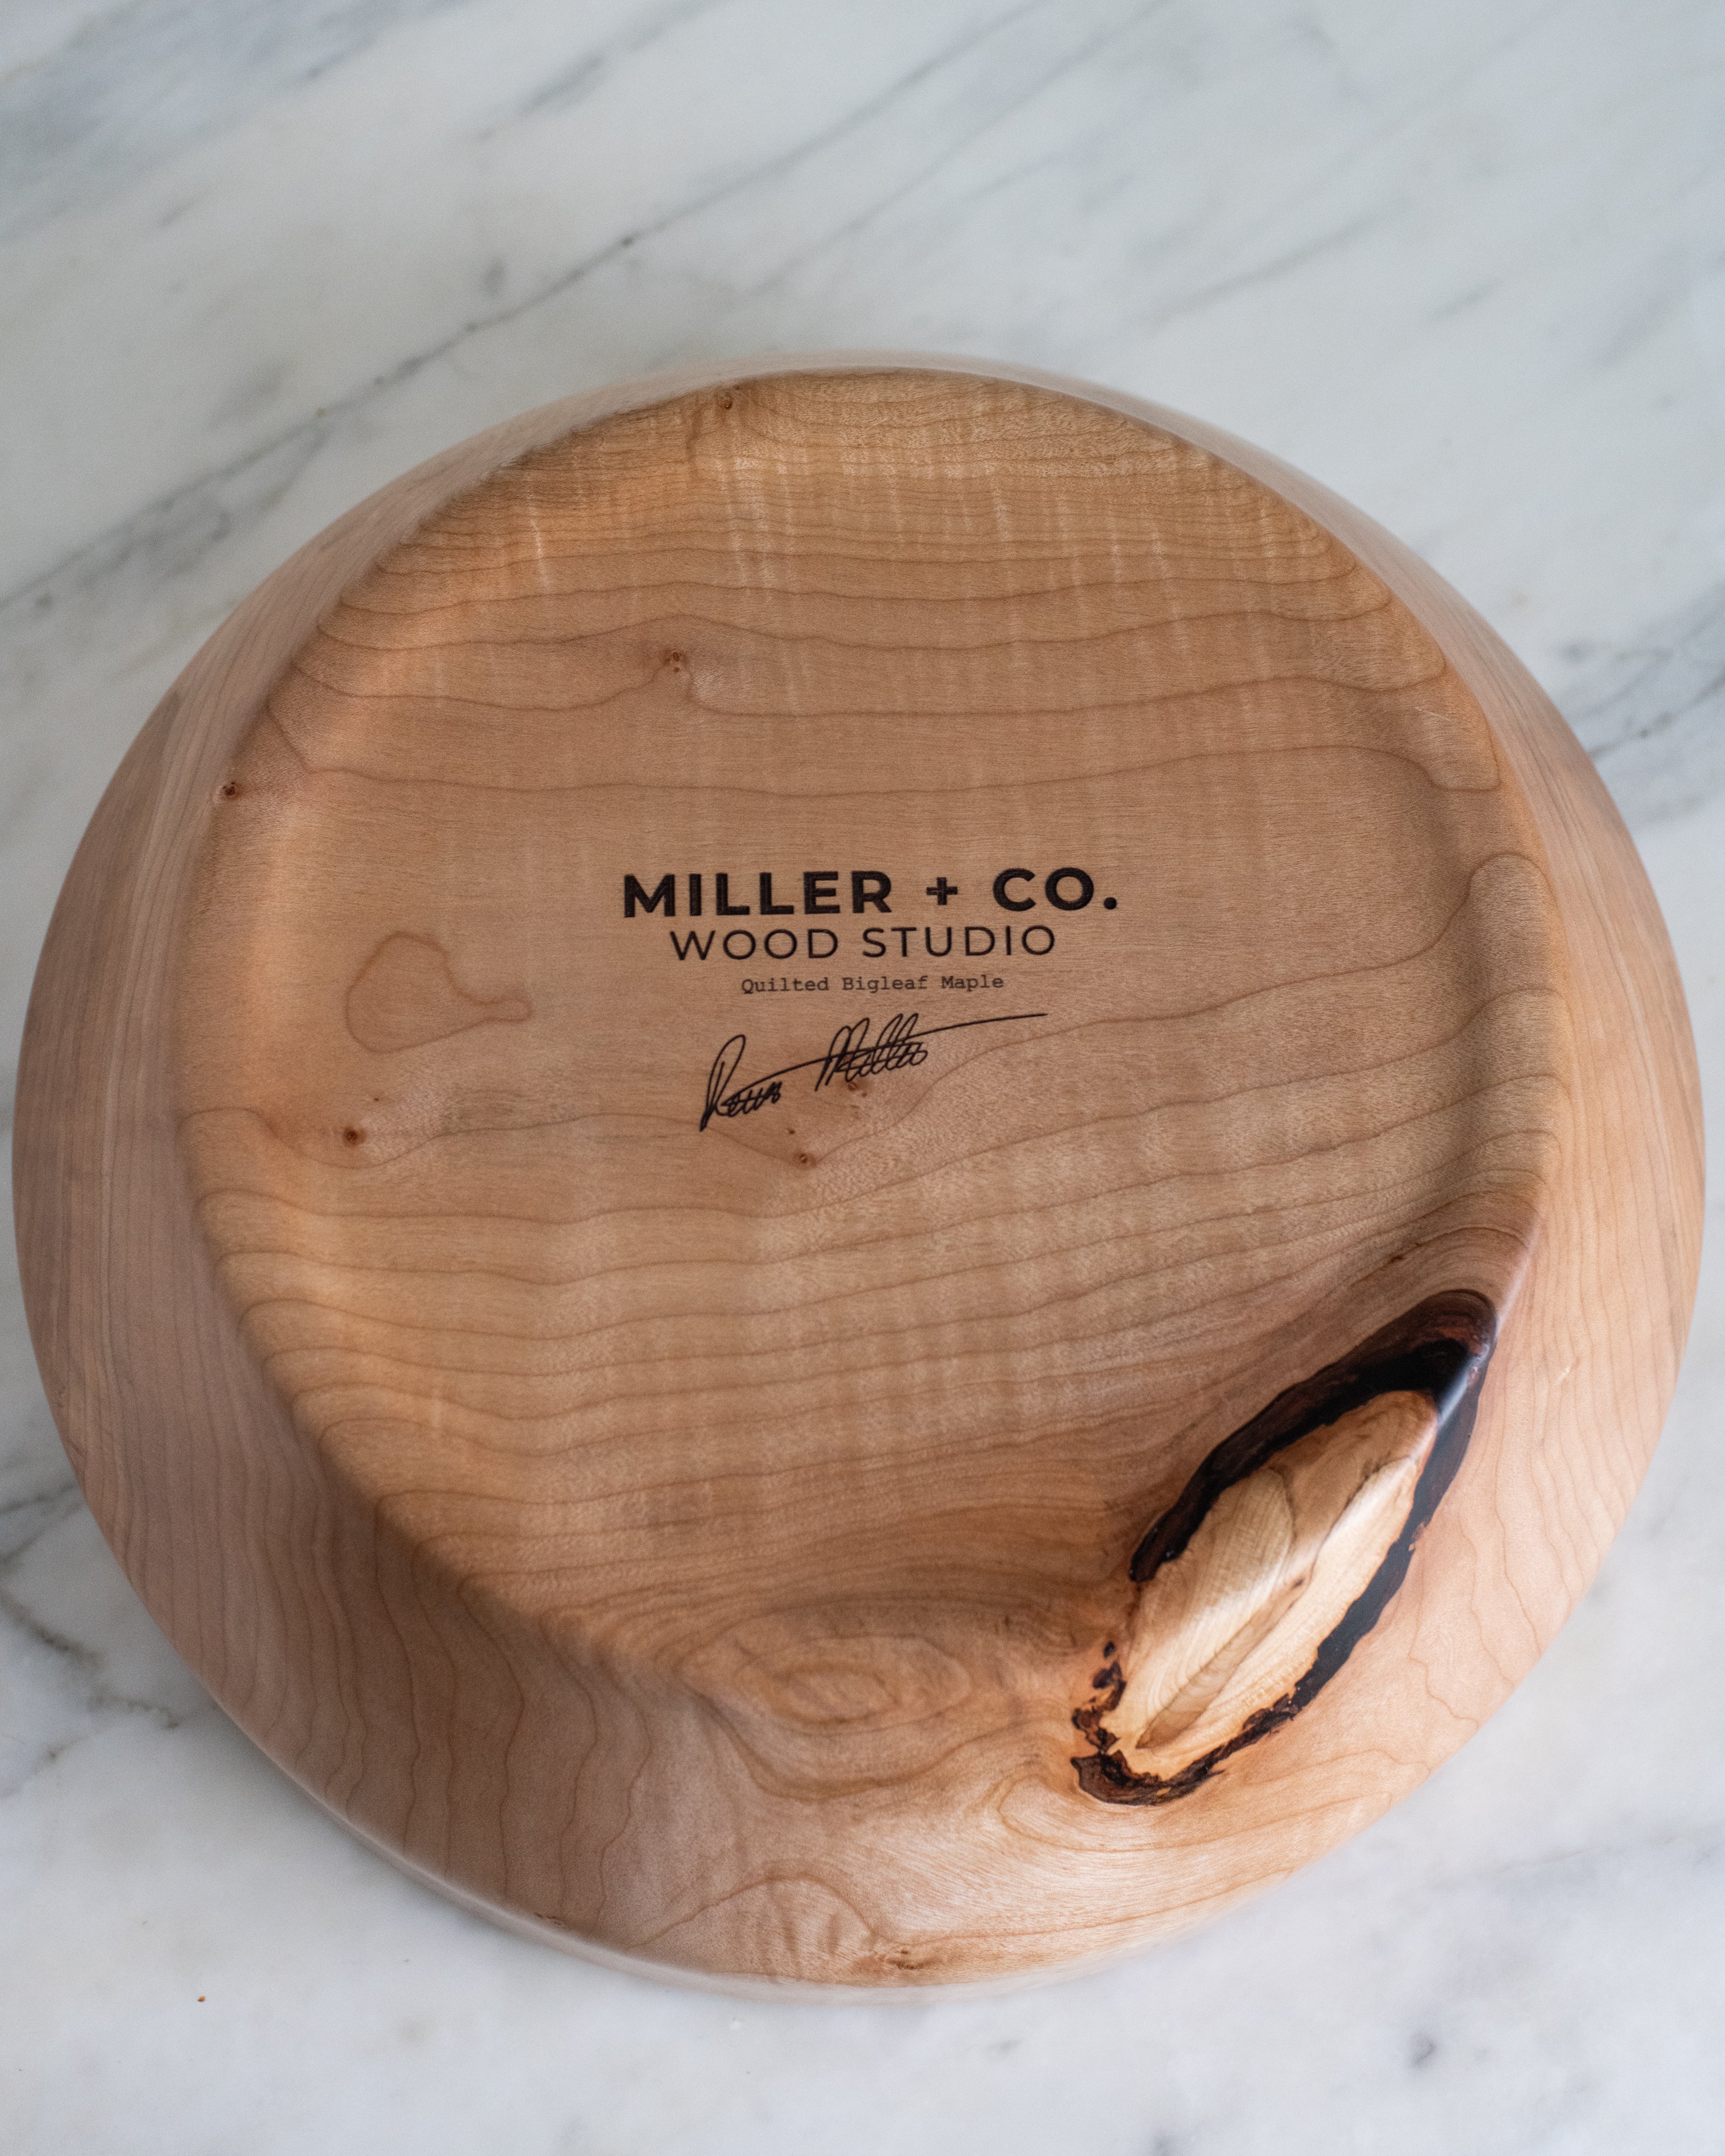 Nimmo Bay and Miller & Co. Wooden Bowl #6